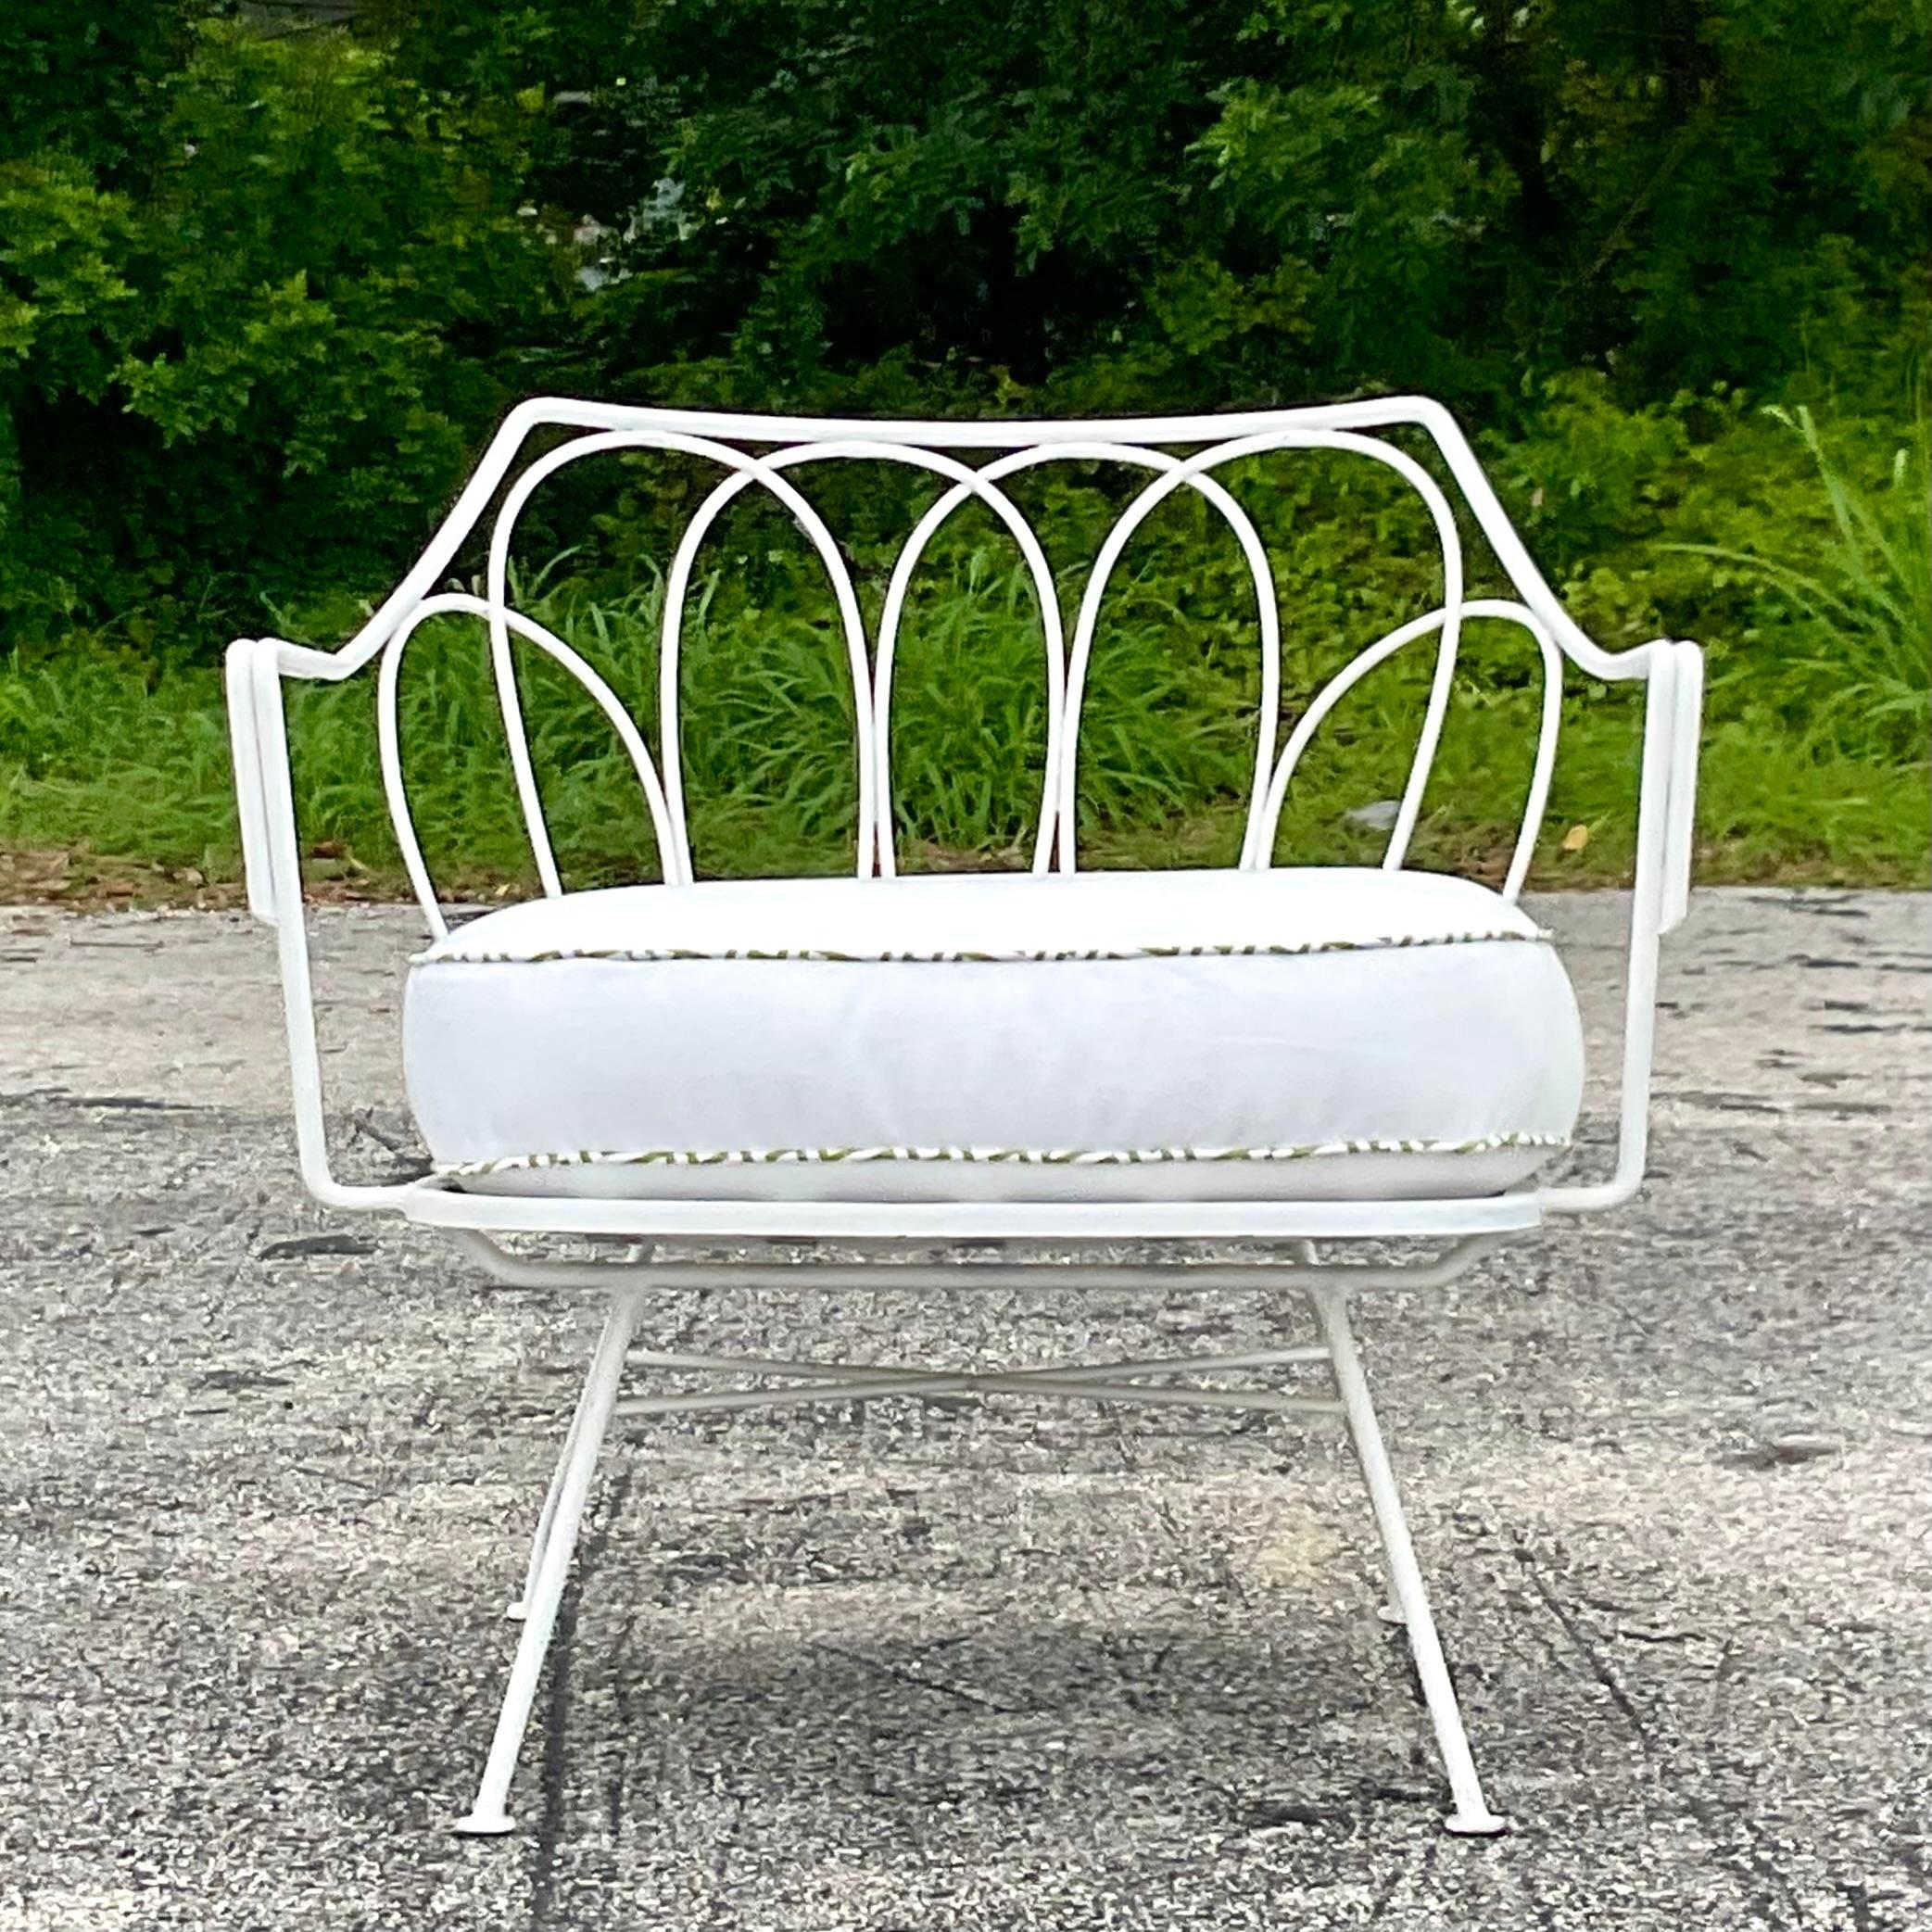 A fabulous vintage MCM outdoor lounge chair. Done in the manner of Maurizio Tempestini for Salterini. Chic looped wrought iron in a painted white finish. Coordinating cushion with contrast green welting. Matching sofa also available on my page.